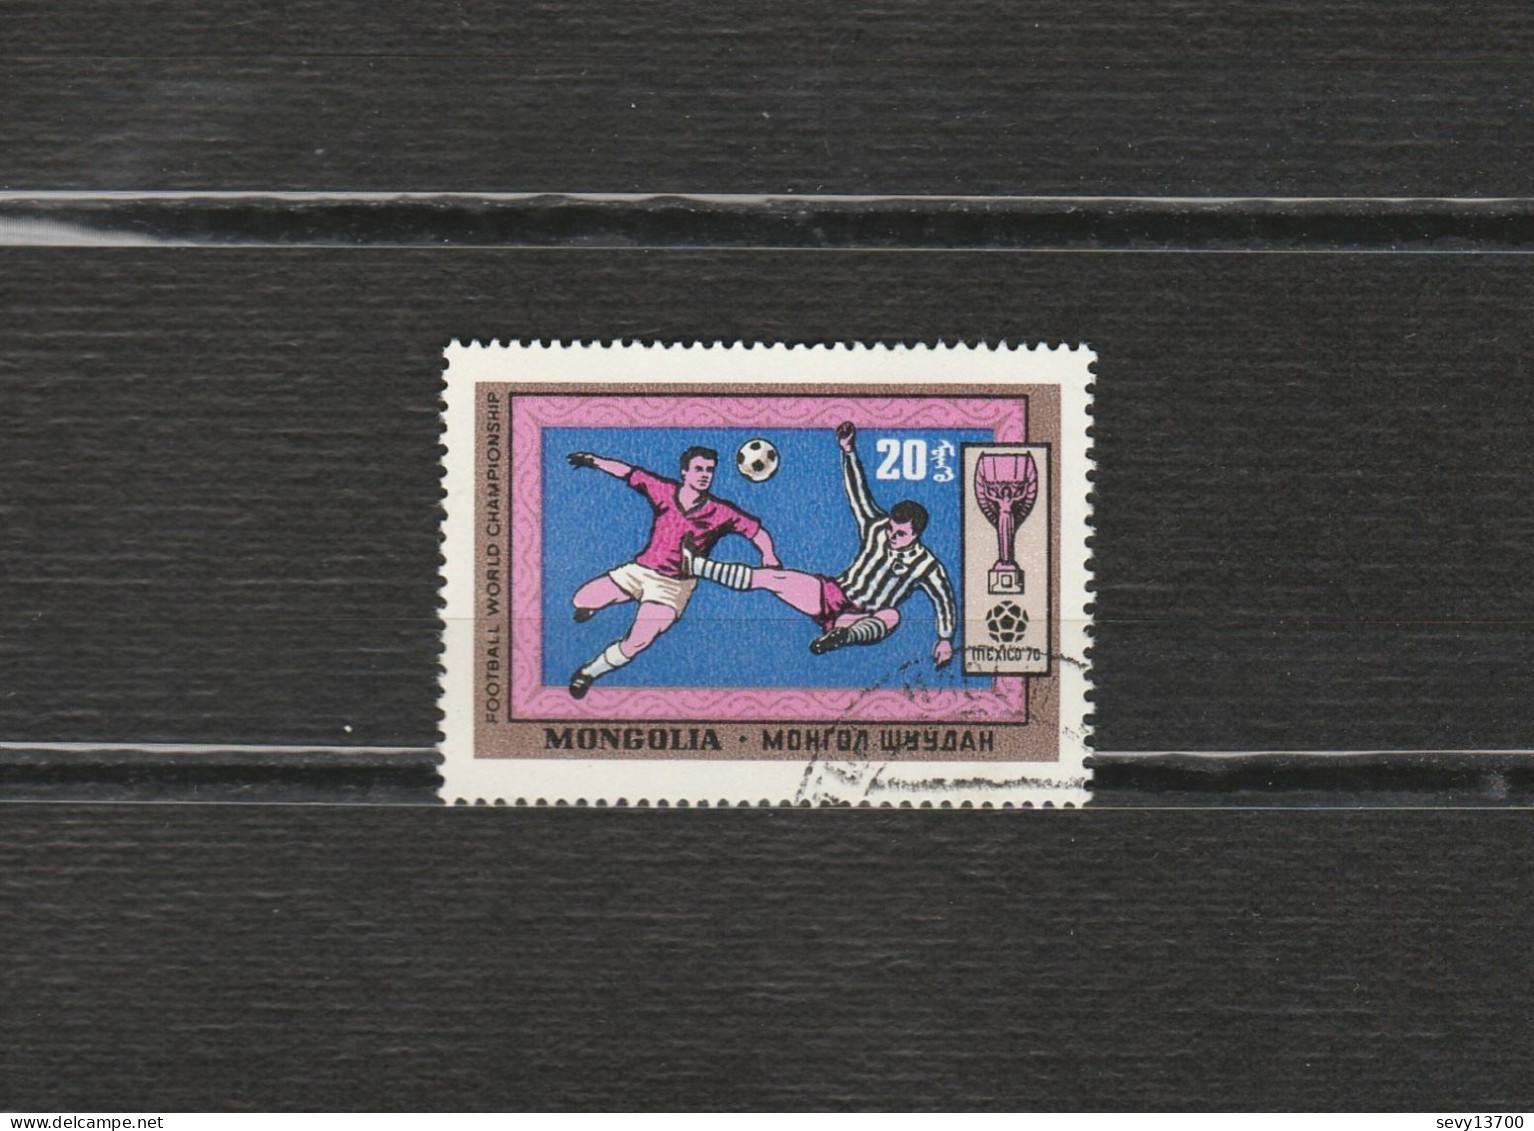 Mongolie - lot 21 timbres - Oeuvres, Tableaux - chasse - sport - champignons